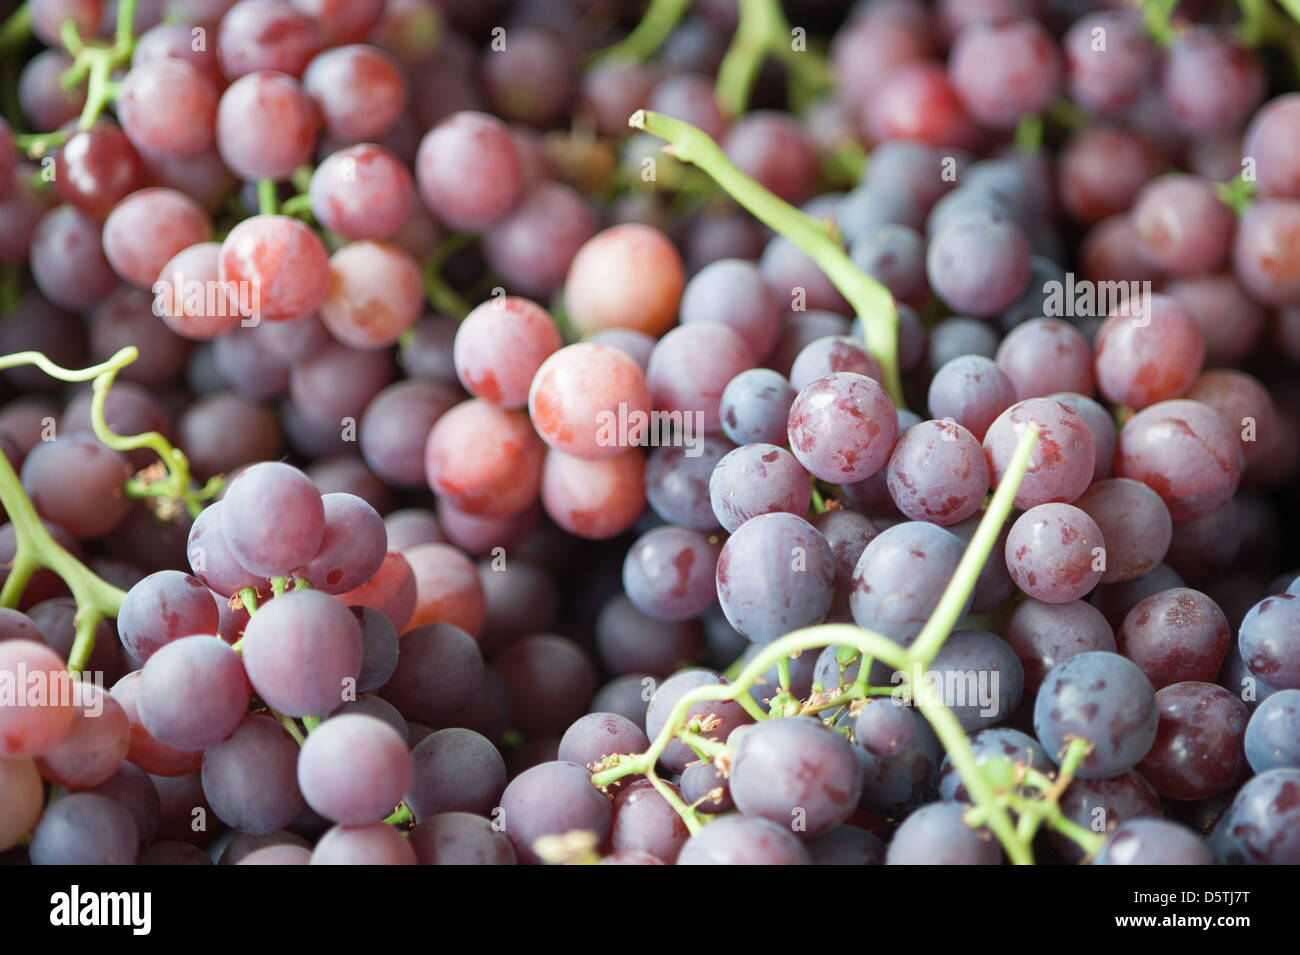 Grapes at Lo Valledor central wholesale produce market in Santiago, Chile Stock Photo